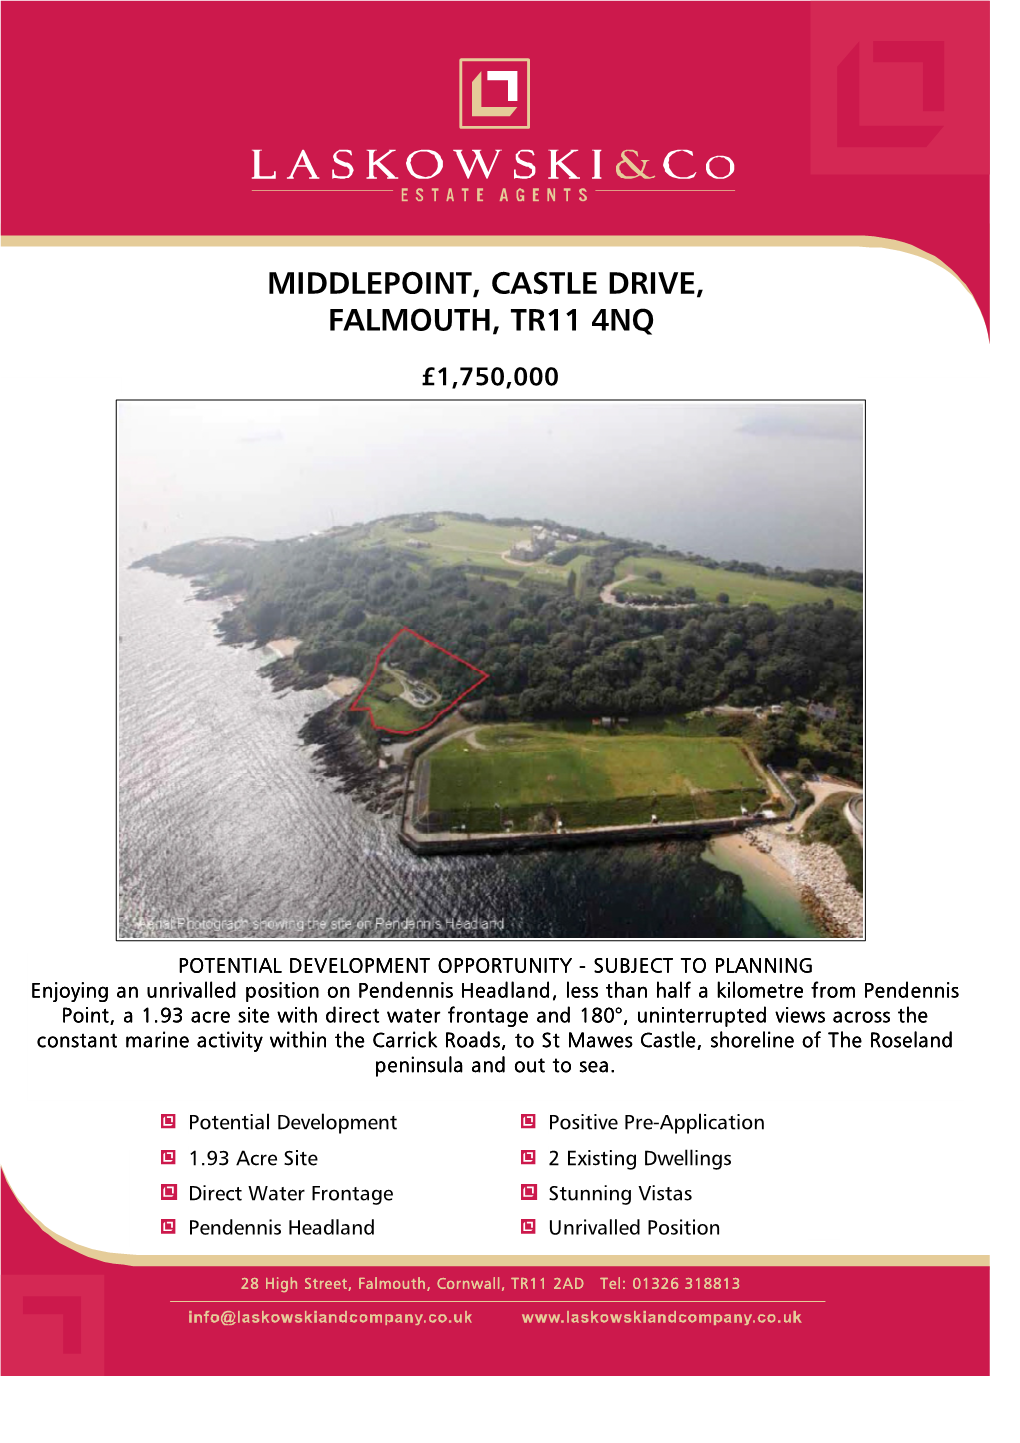 Middlepoint, Castle Drive, Falmouth, Tr11 4Nq